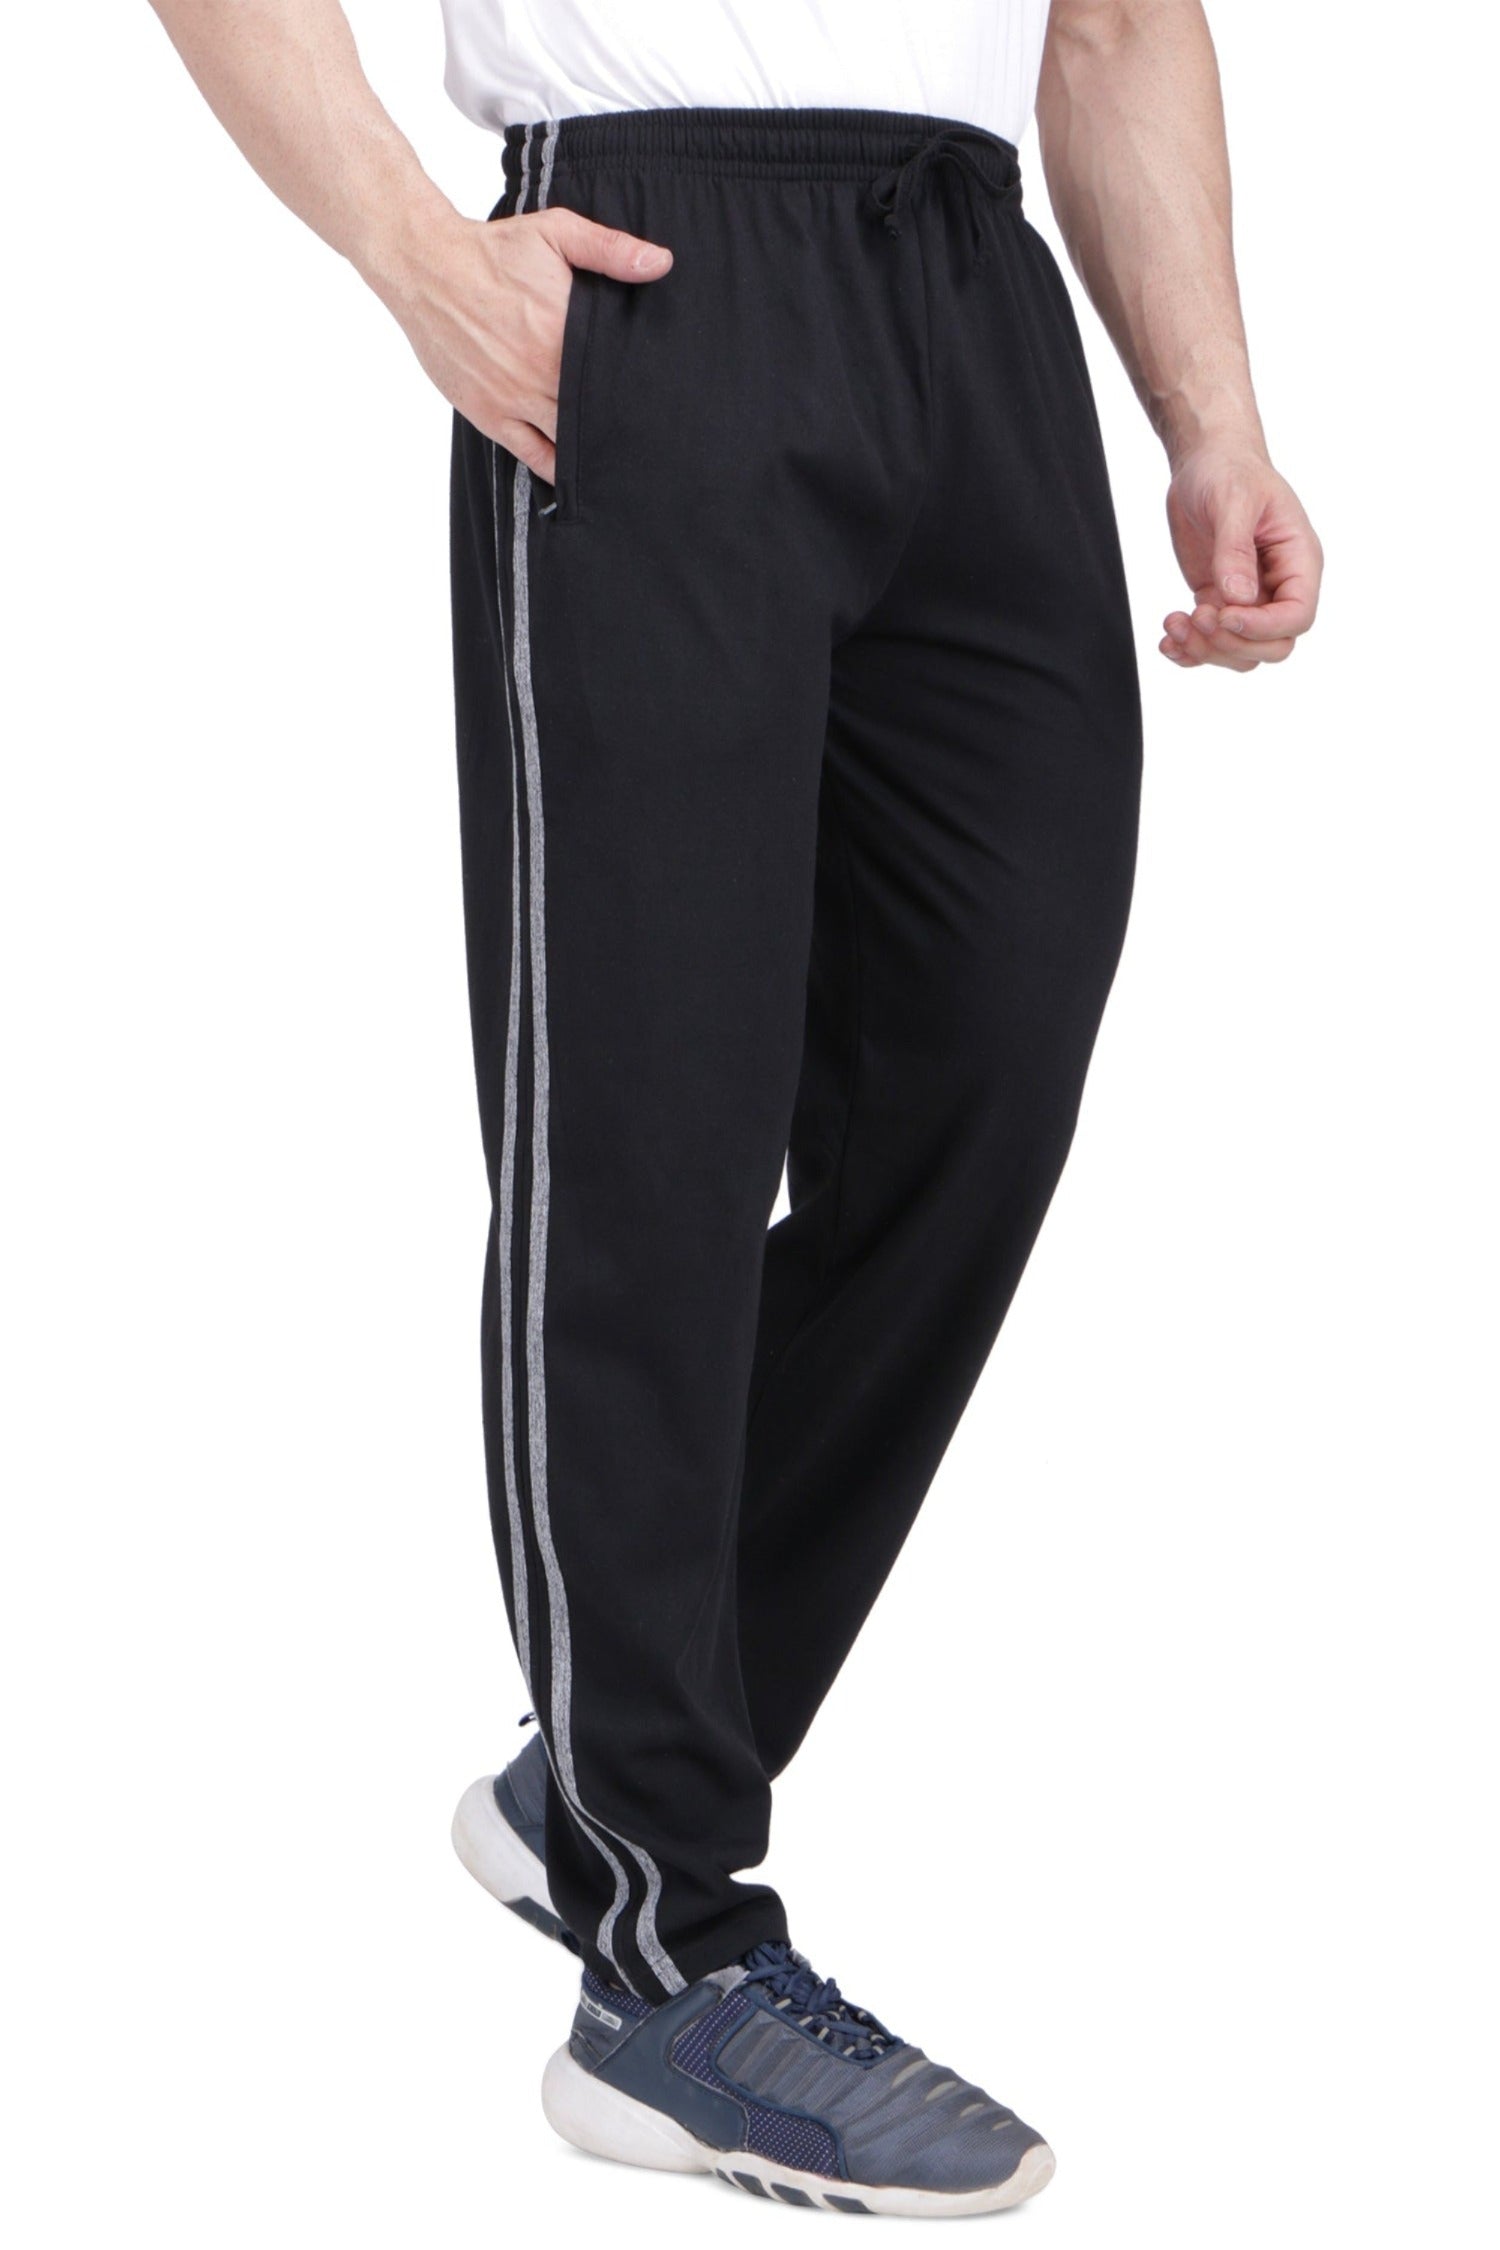 Plus Size Black stretch track pants For Women XXL to 6XL  The Pink Moon